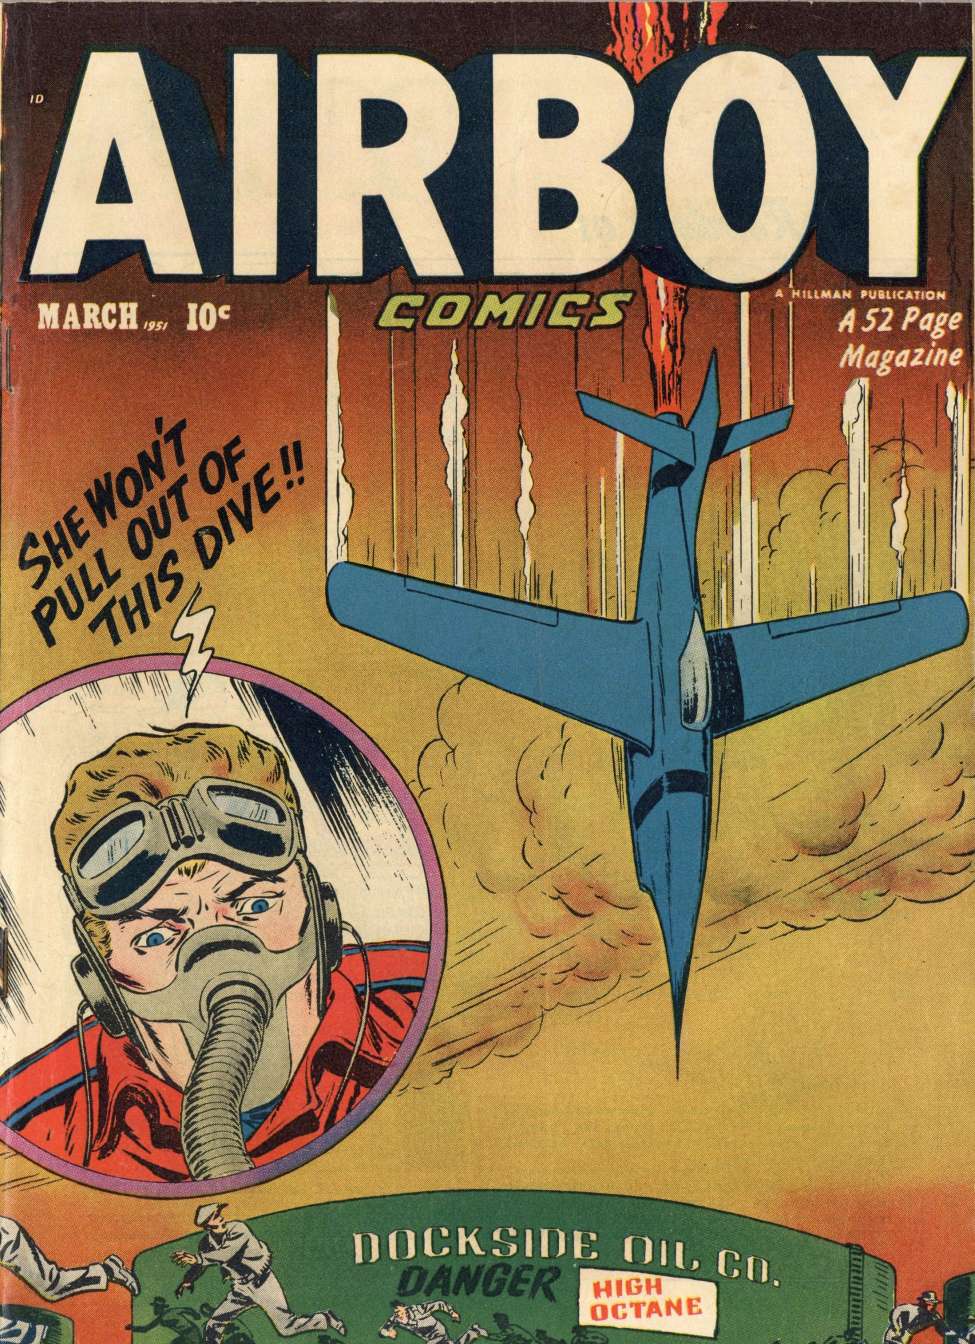 Comic Book Cover For Airboy Comics v8 2